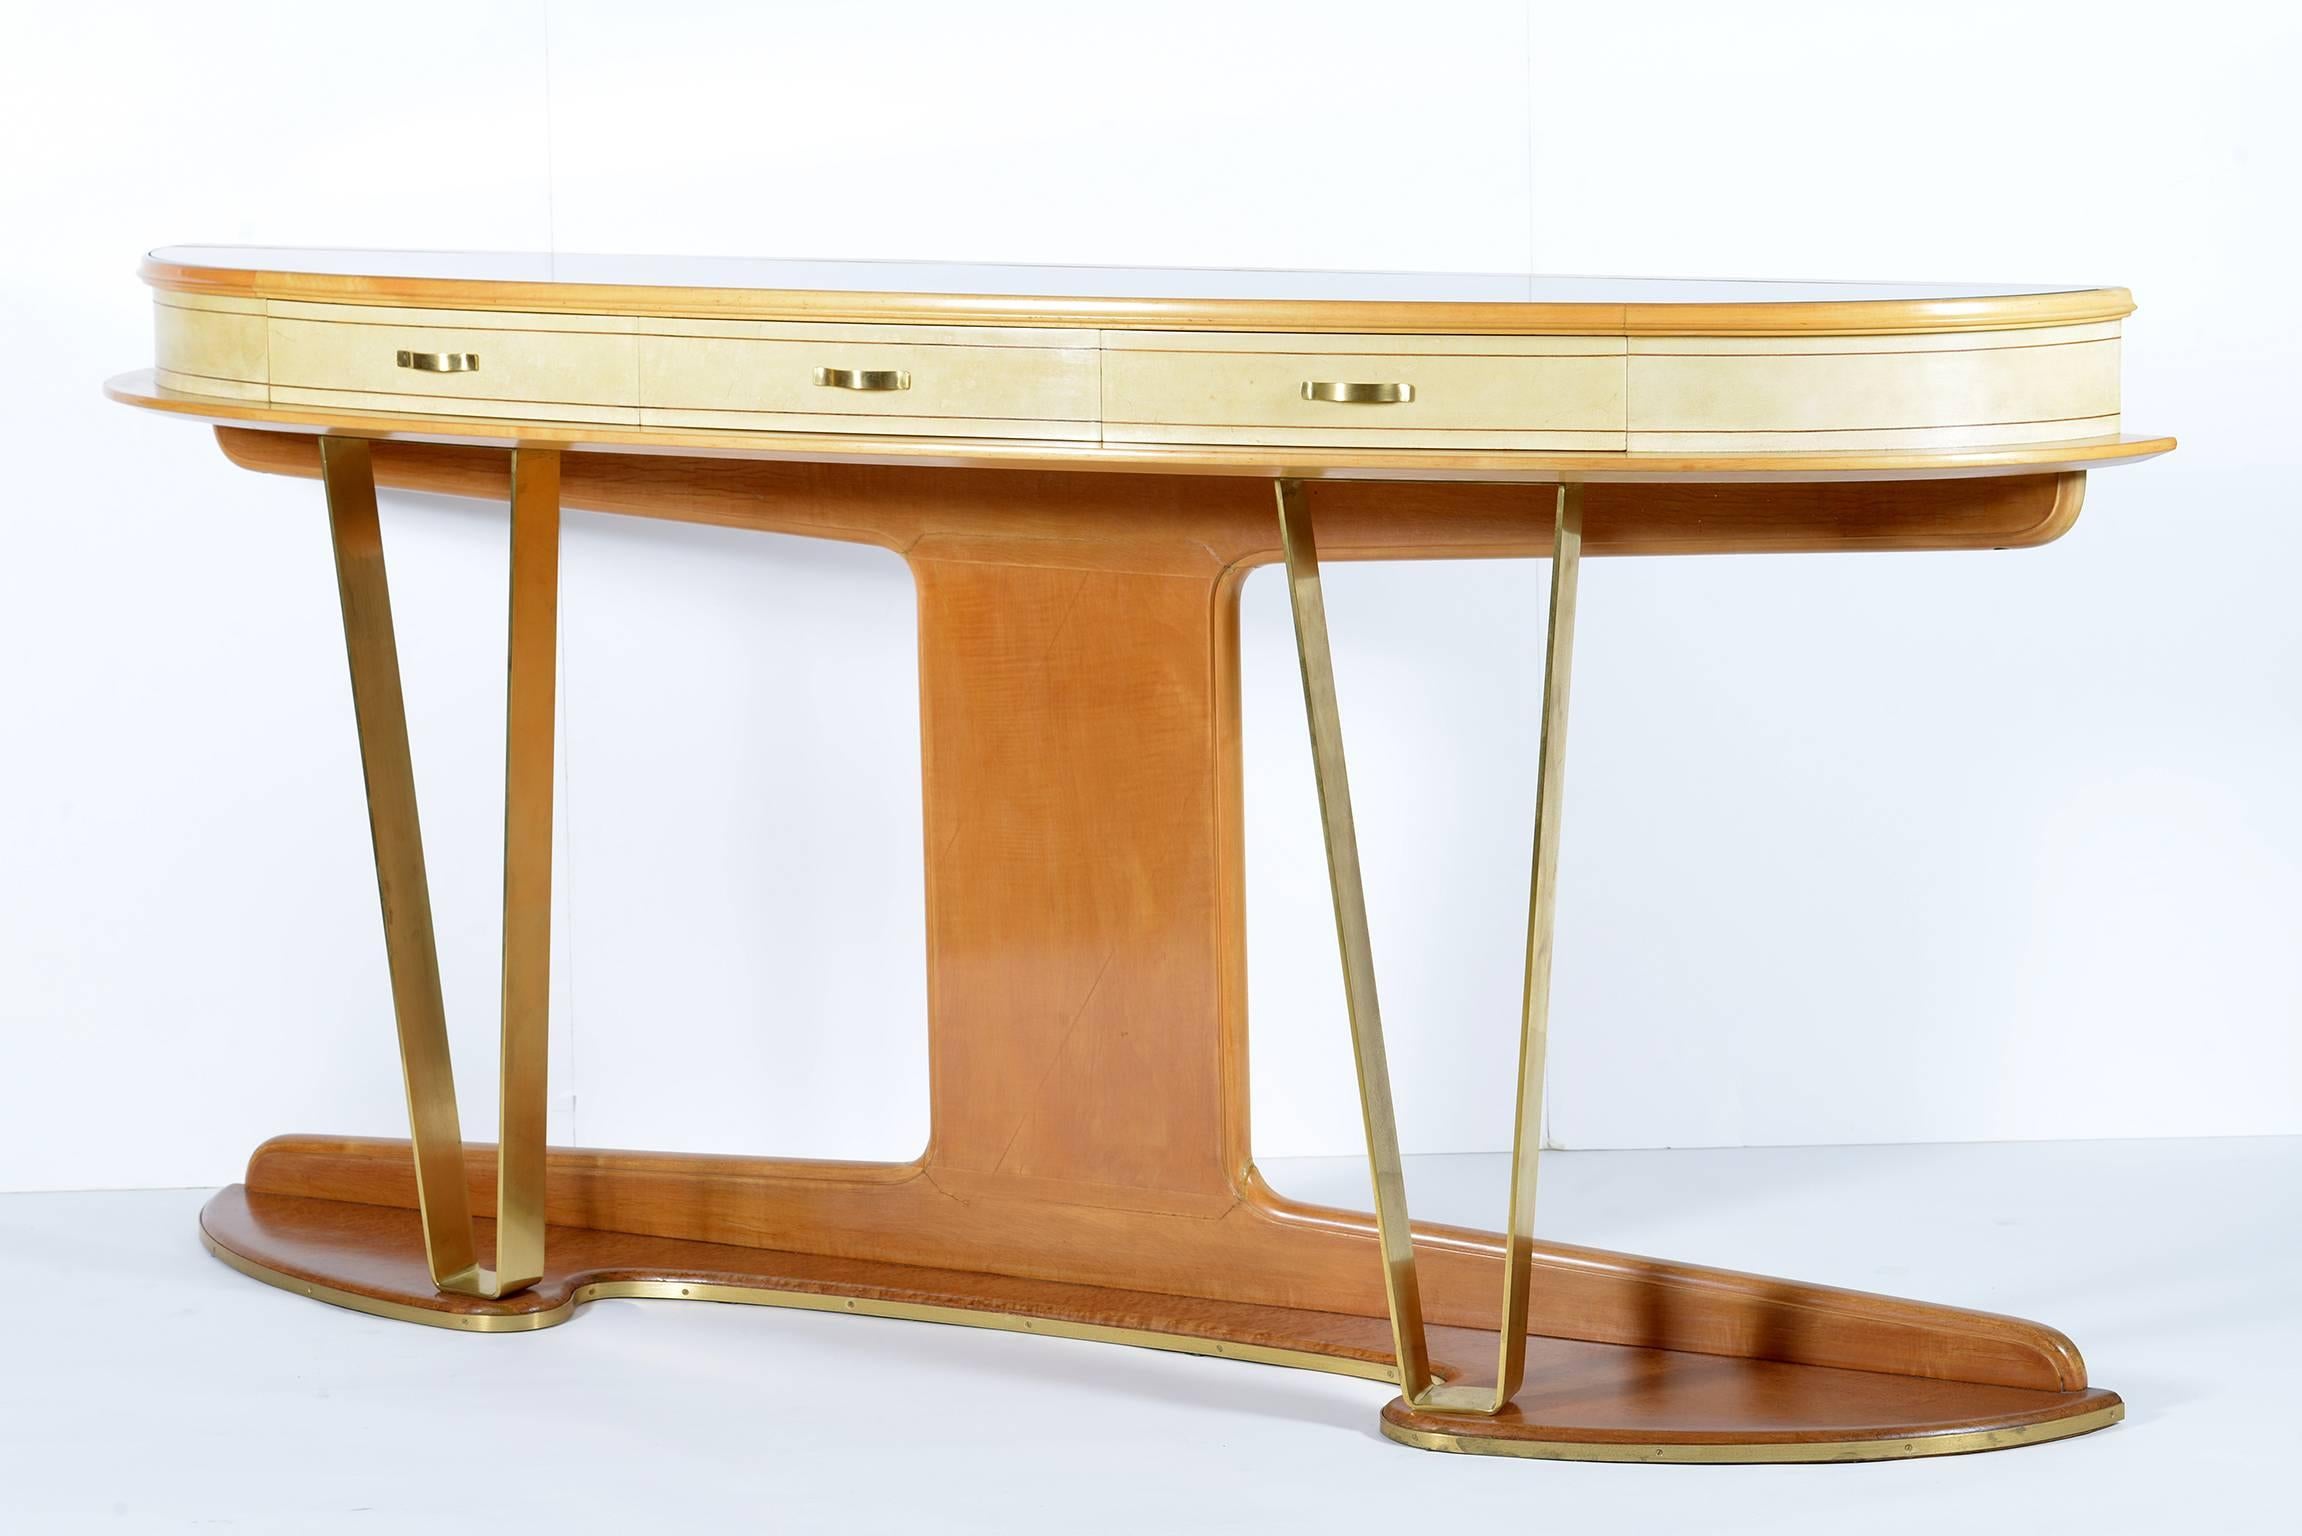 Solid maple wood structure with three drawers covered in parchment  inlaid with walnut   .
Beautiful demi lune shaped top with encased gold glass ,  bird eyes maples wood base edged by a brass rod that follows the sinuous shape of the edge.
Two